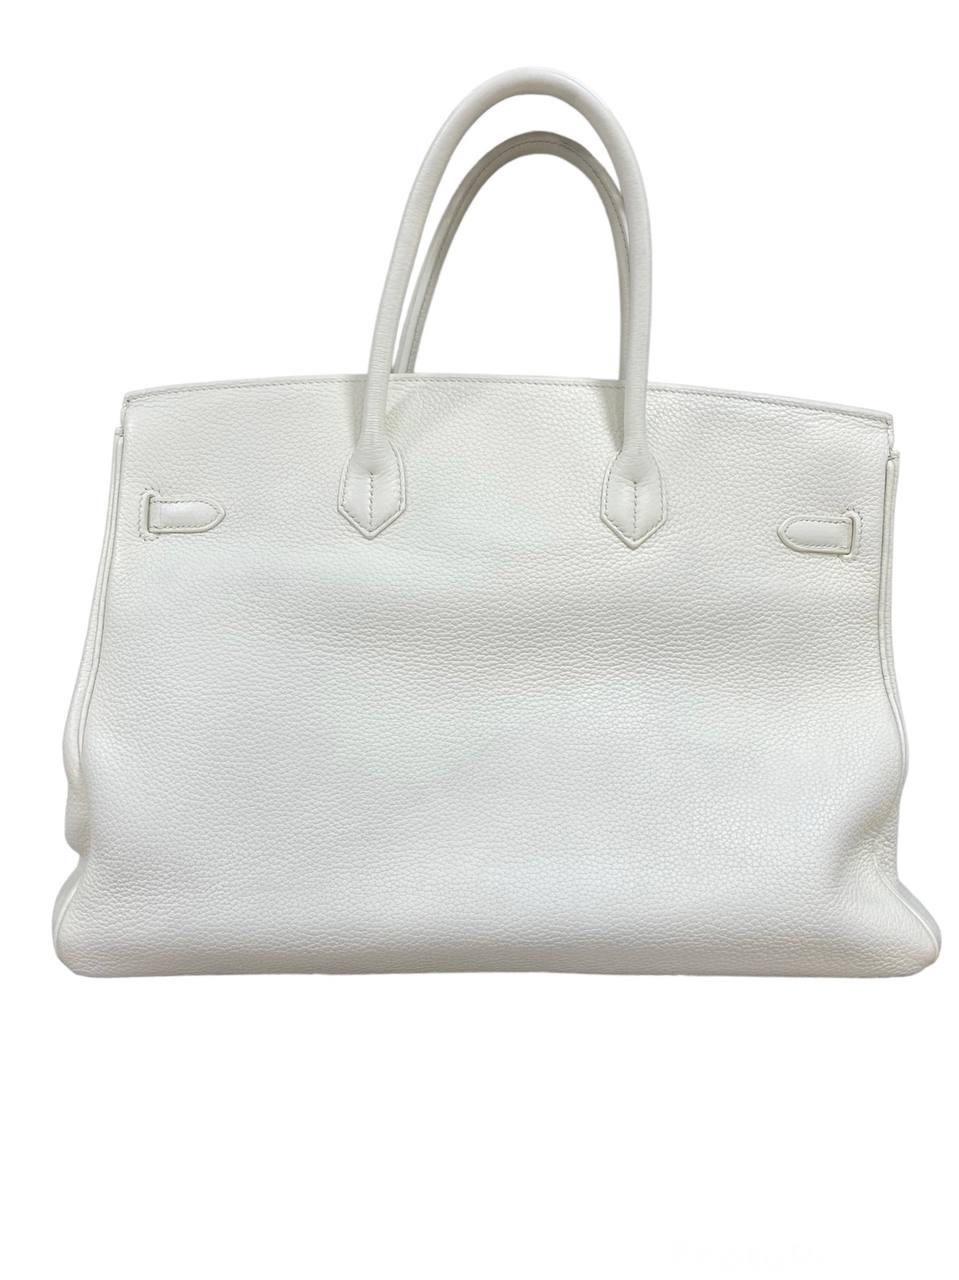 2011 Hermès Birkin 40 White Clemence Leather Top Handle Bag  In Excellent Condition For Sale In Torre Del Greco, IT